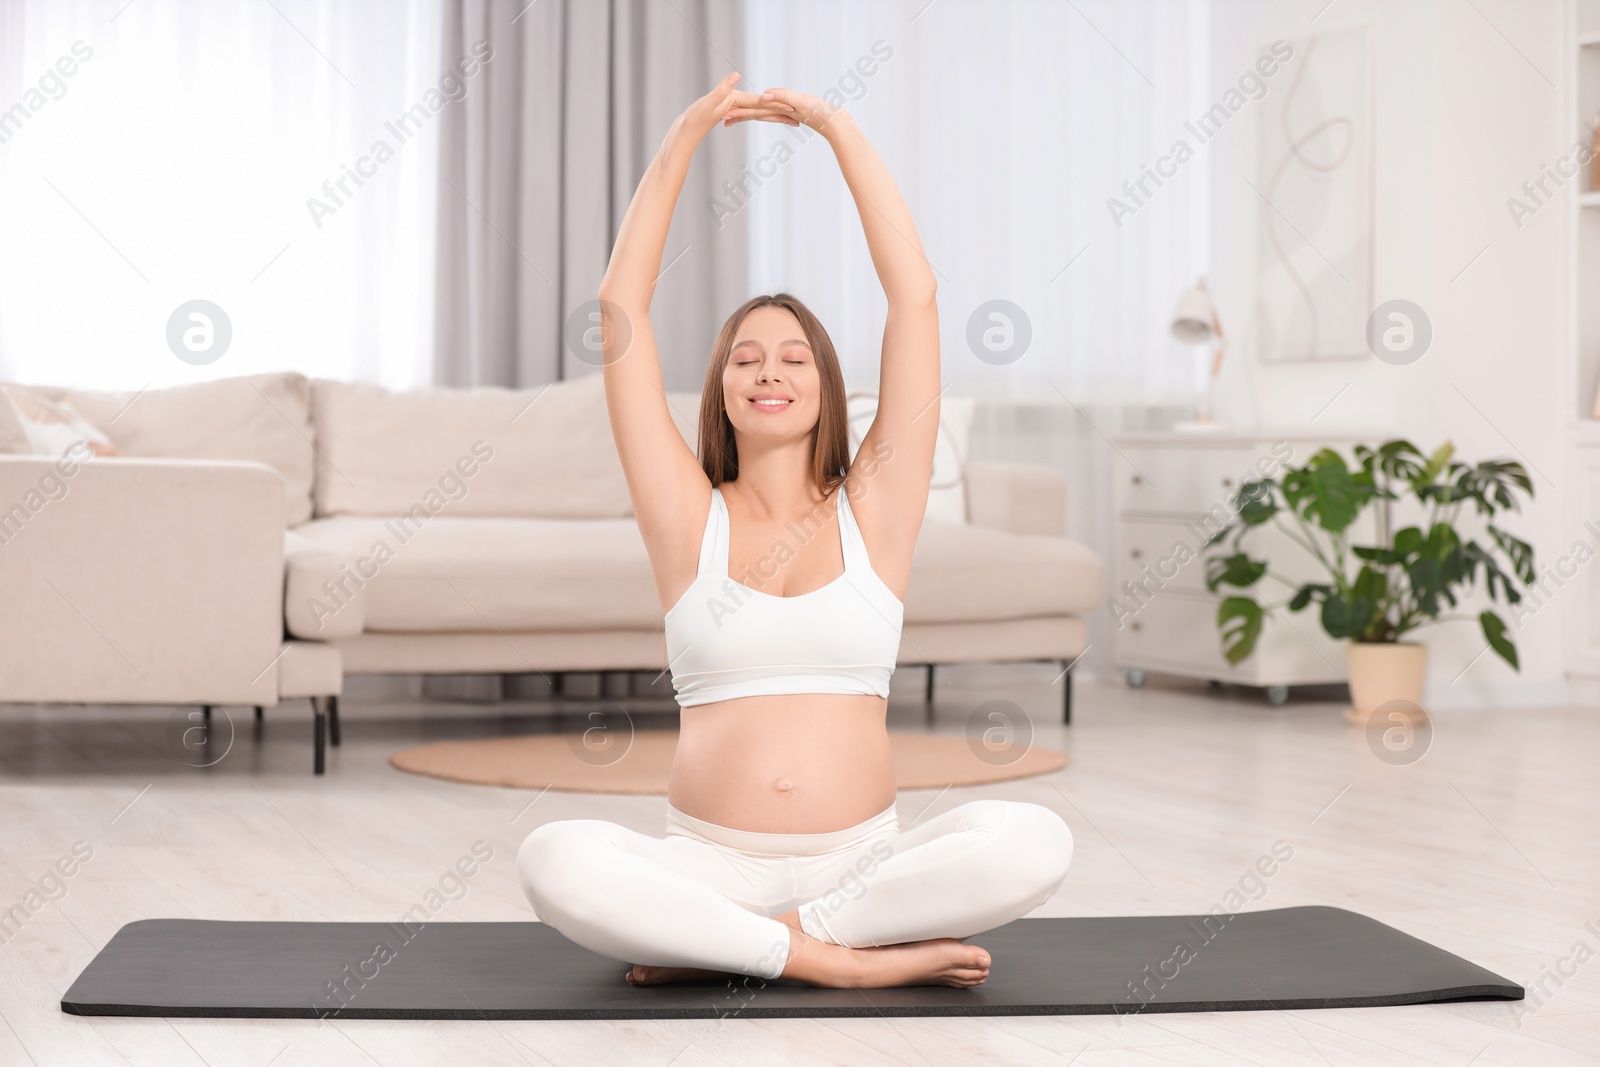 Photo of Pregnant woman stretching on yoga mat at home